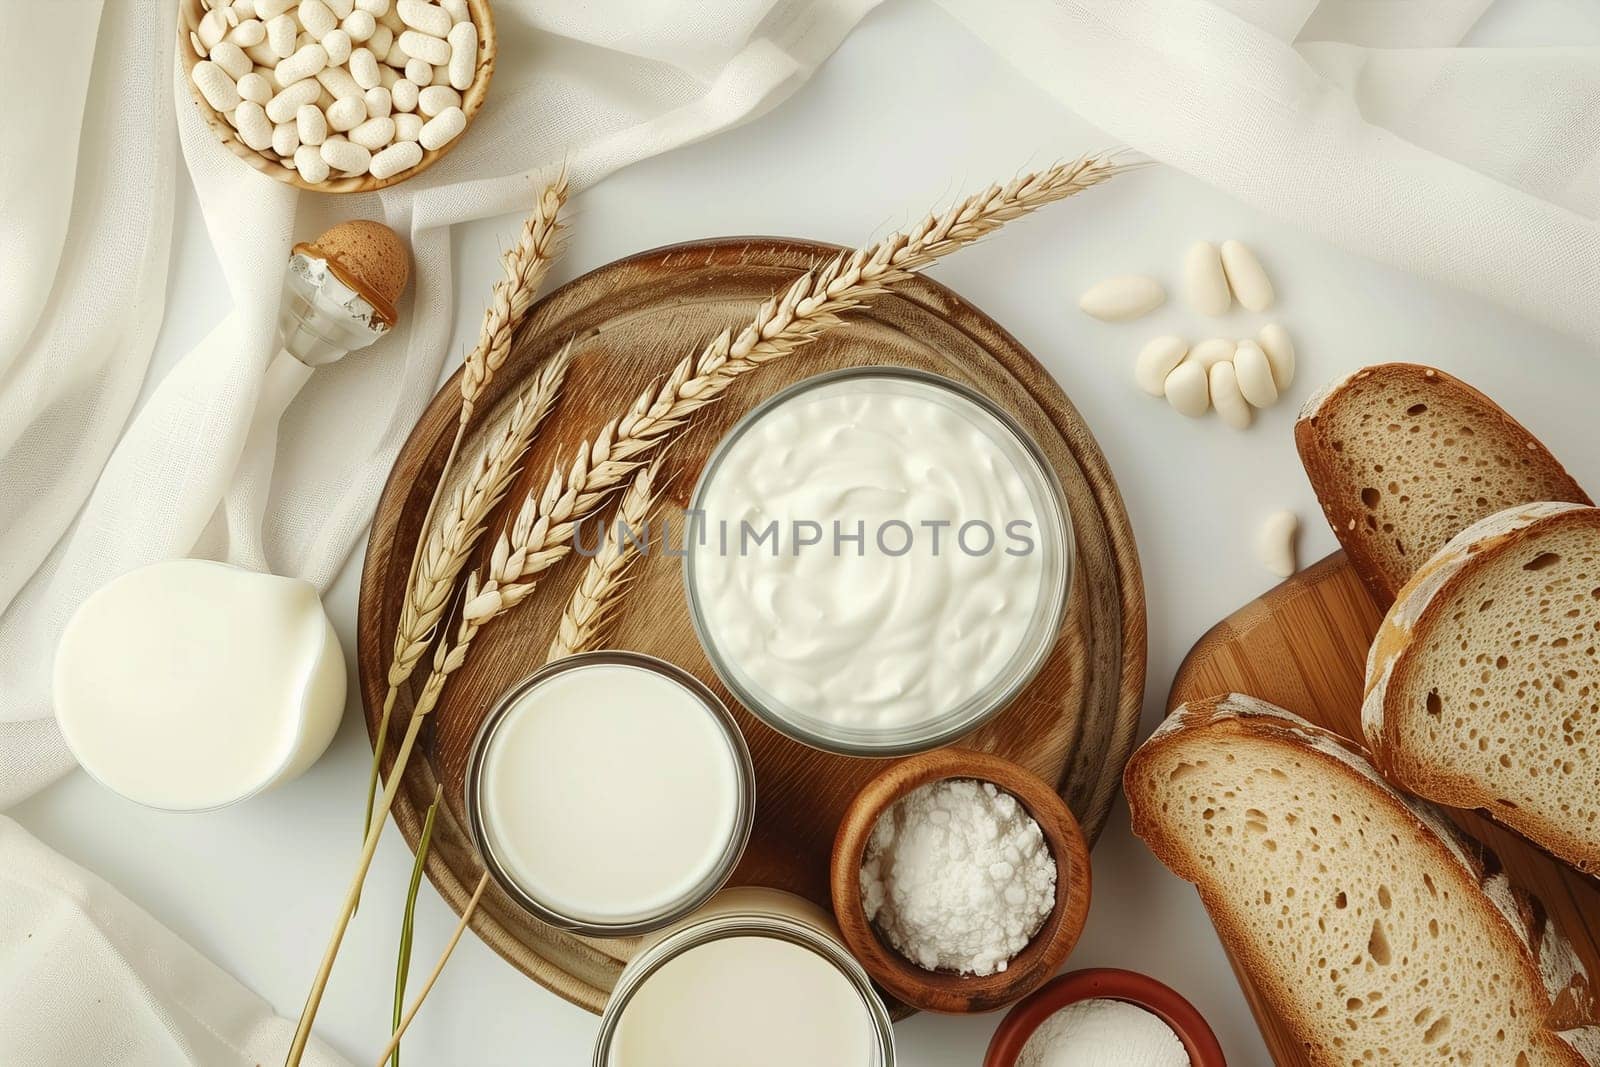 A table displaying an assortment of bread, cheese, and other foods for Shavuot celebration.